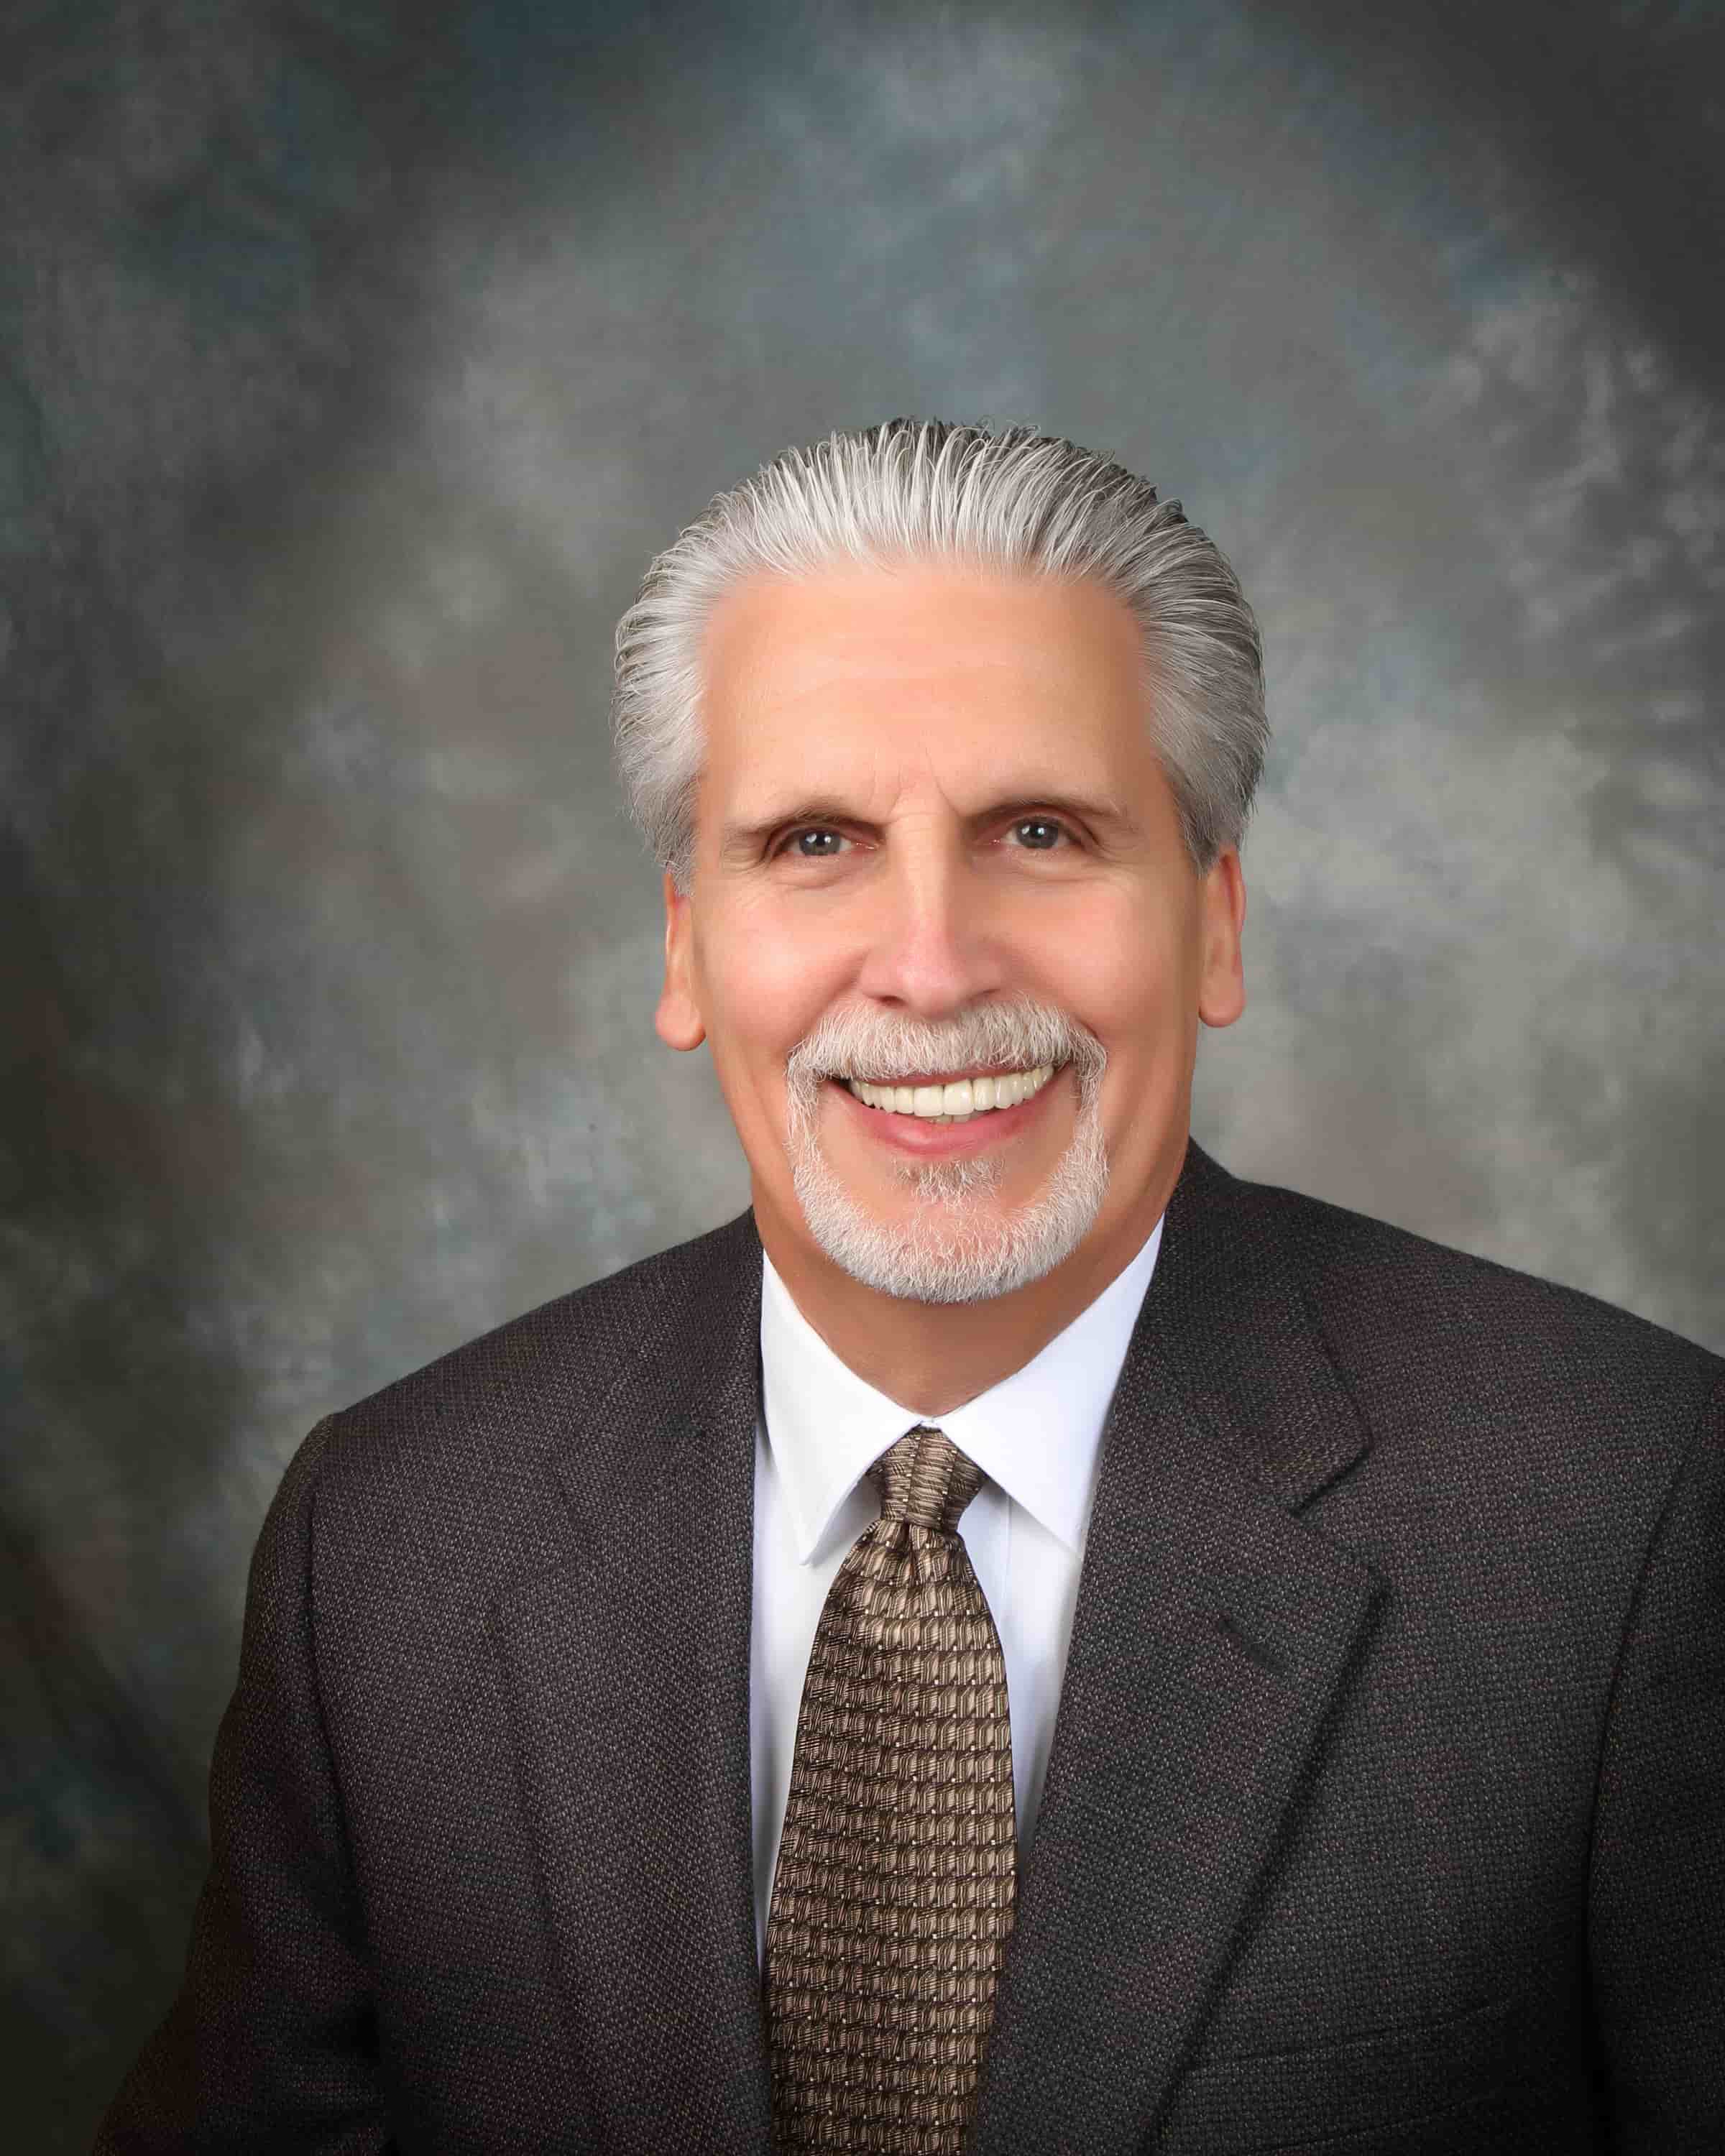 This is a photo of our Killeen TX chiropractor Dr. Stan Isdale